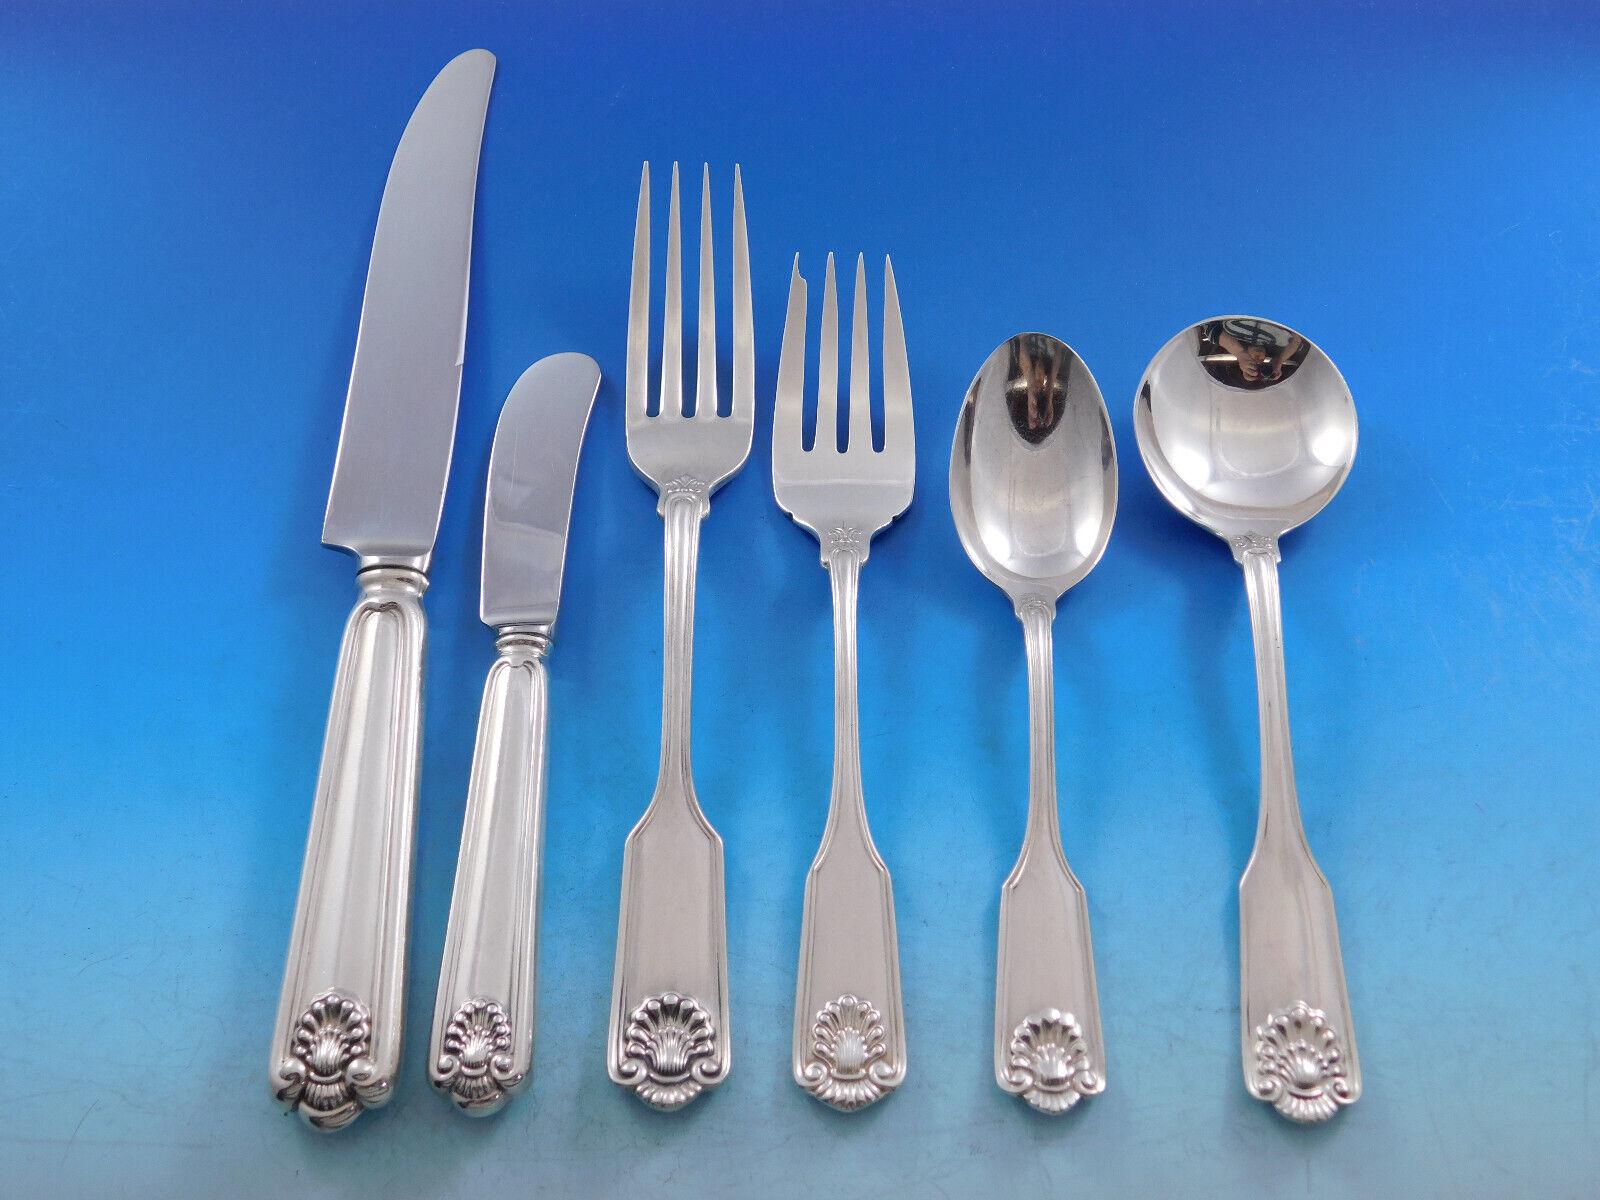 Gorgeous Fiddle Shell by Frank Smith sterling silver flatware set, 82 pieces. This set includes:

12 regular knives, french, 8 3/4